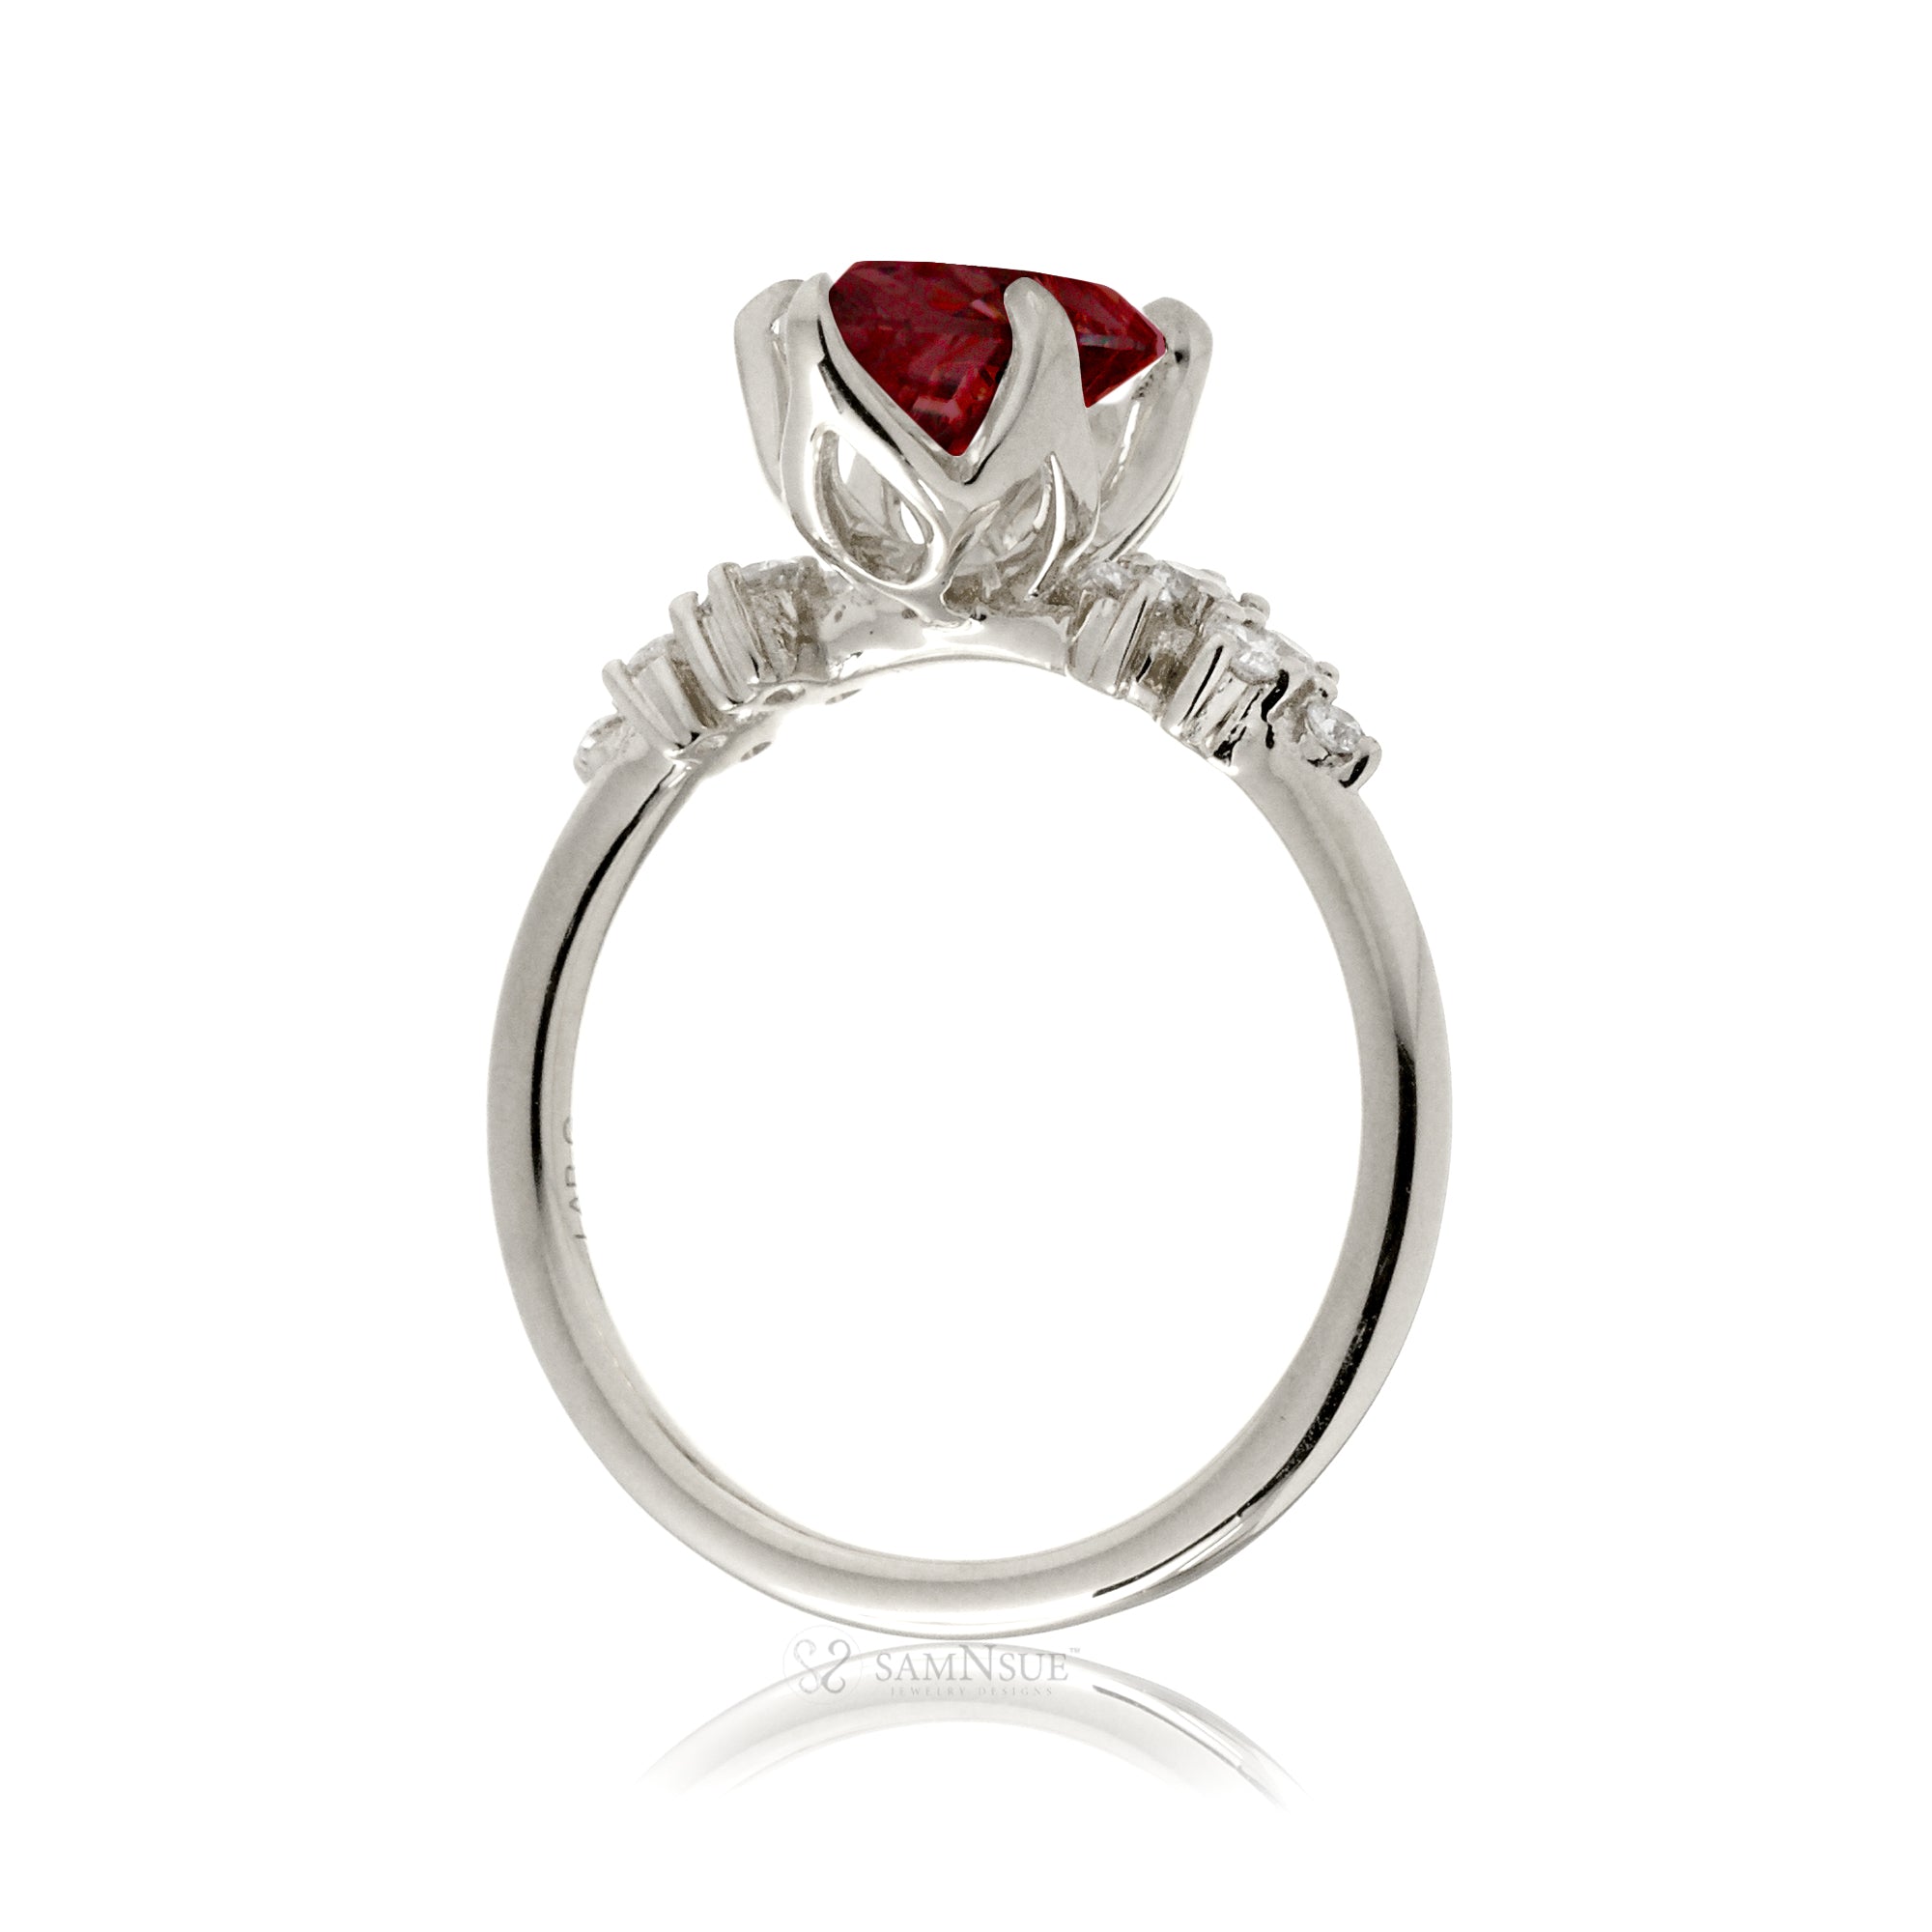 Marquise ruby and diamond solitaire engagement ring in white gold or platinum